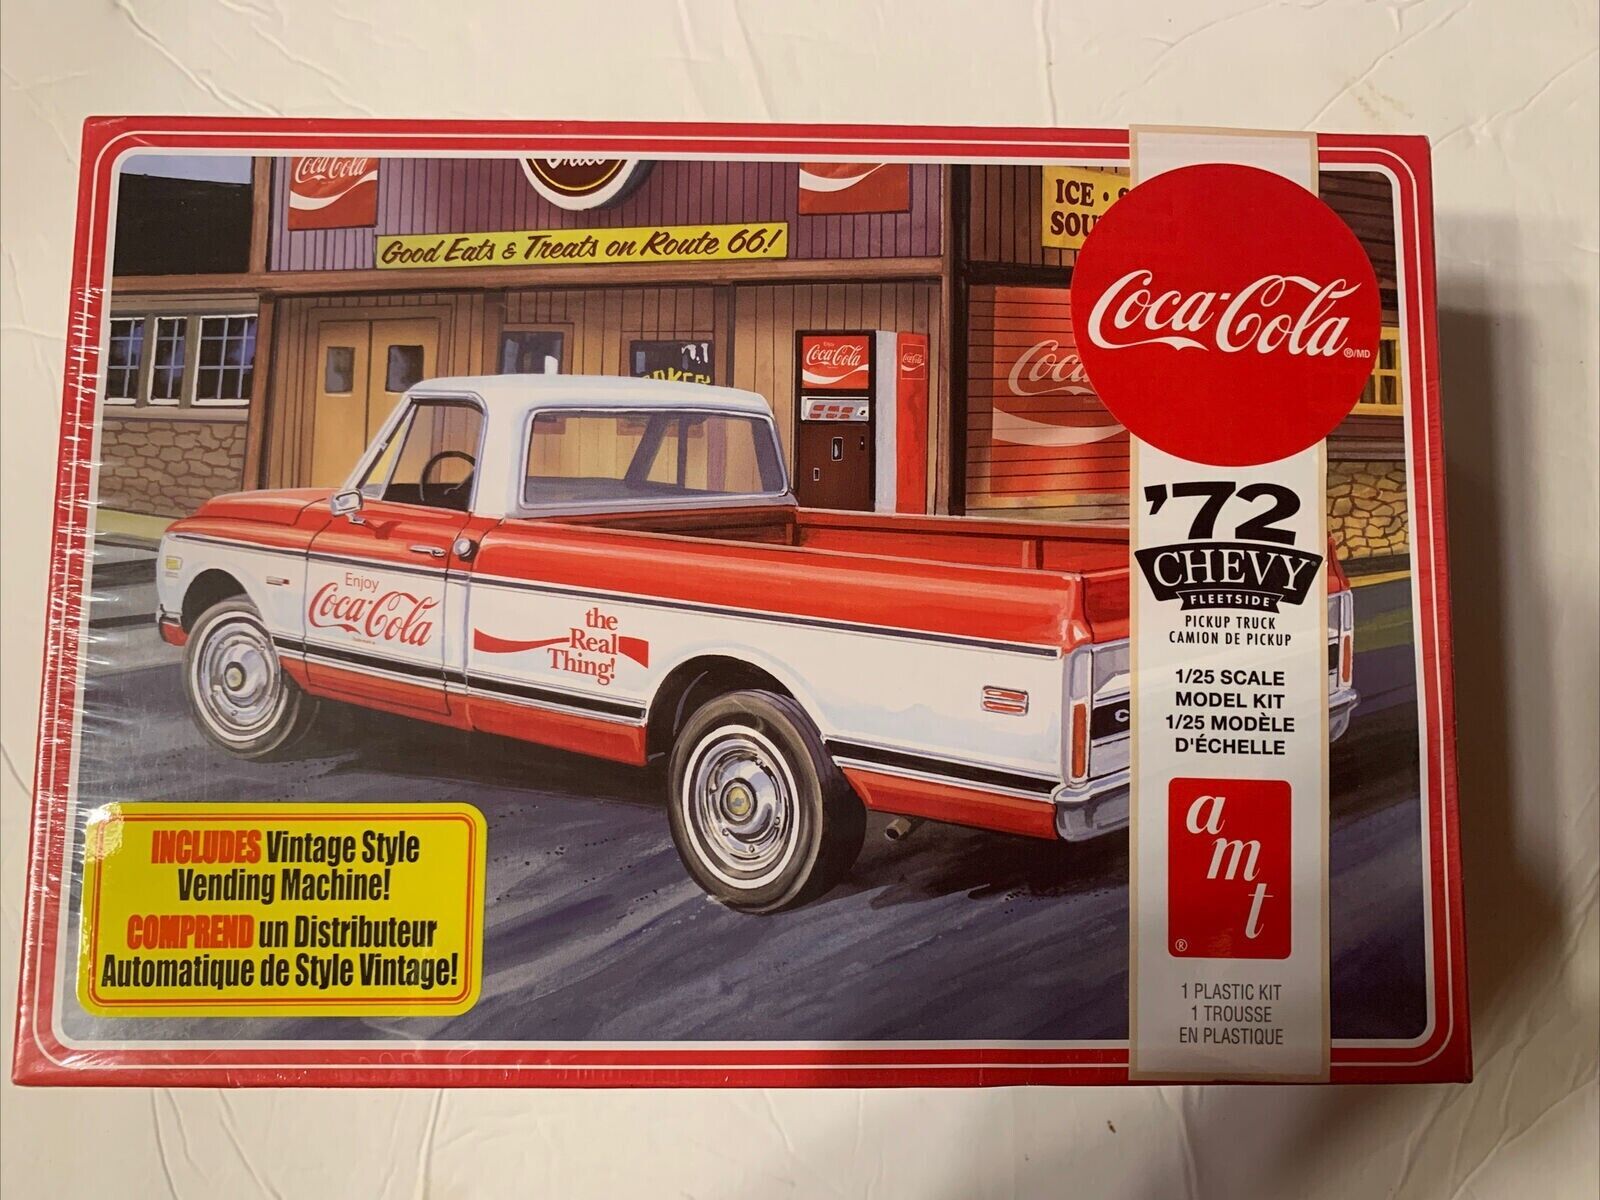 Primary image for AMT Coke Coca-Cola 1972 Chevy Pickup Truck w/ Vending Machine Model Kit 1:25 NEW